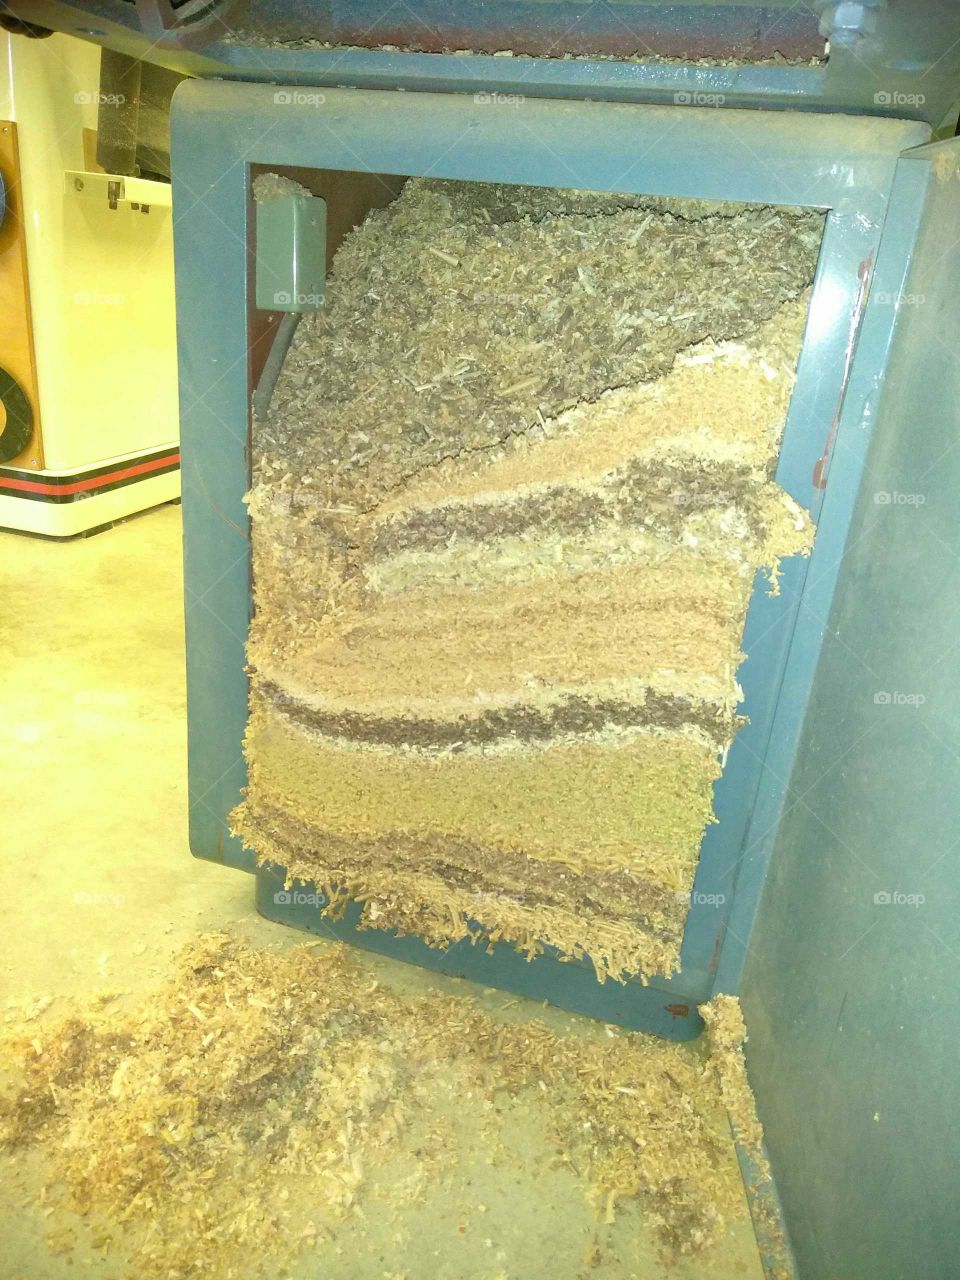 Wood shavings collected in tablesaw over a year of usage.